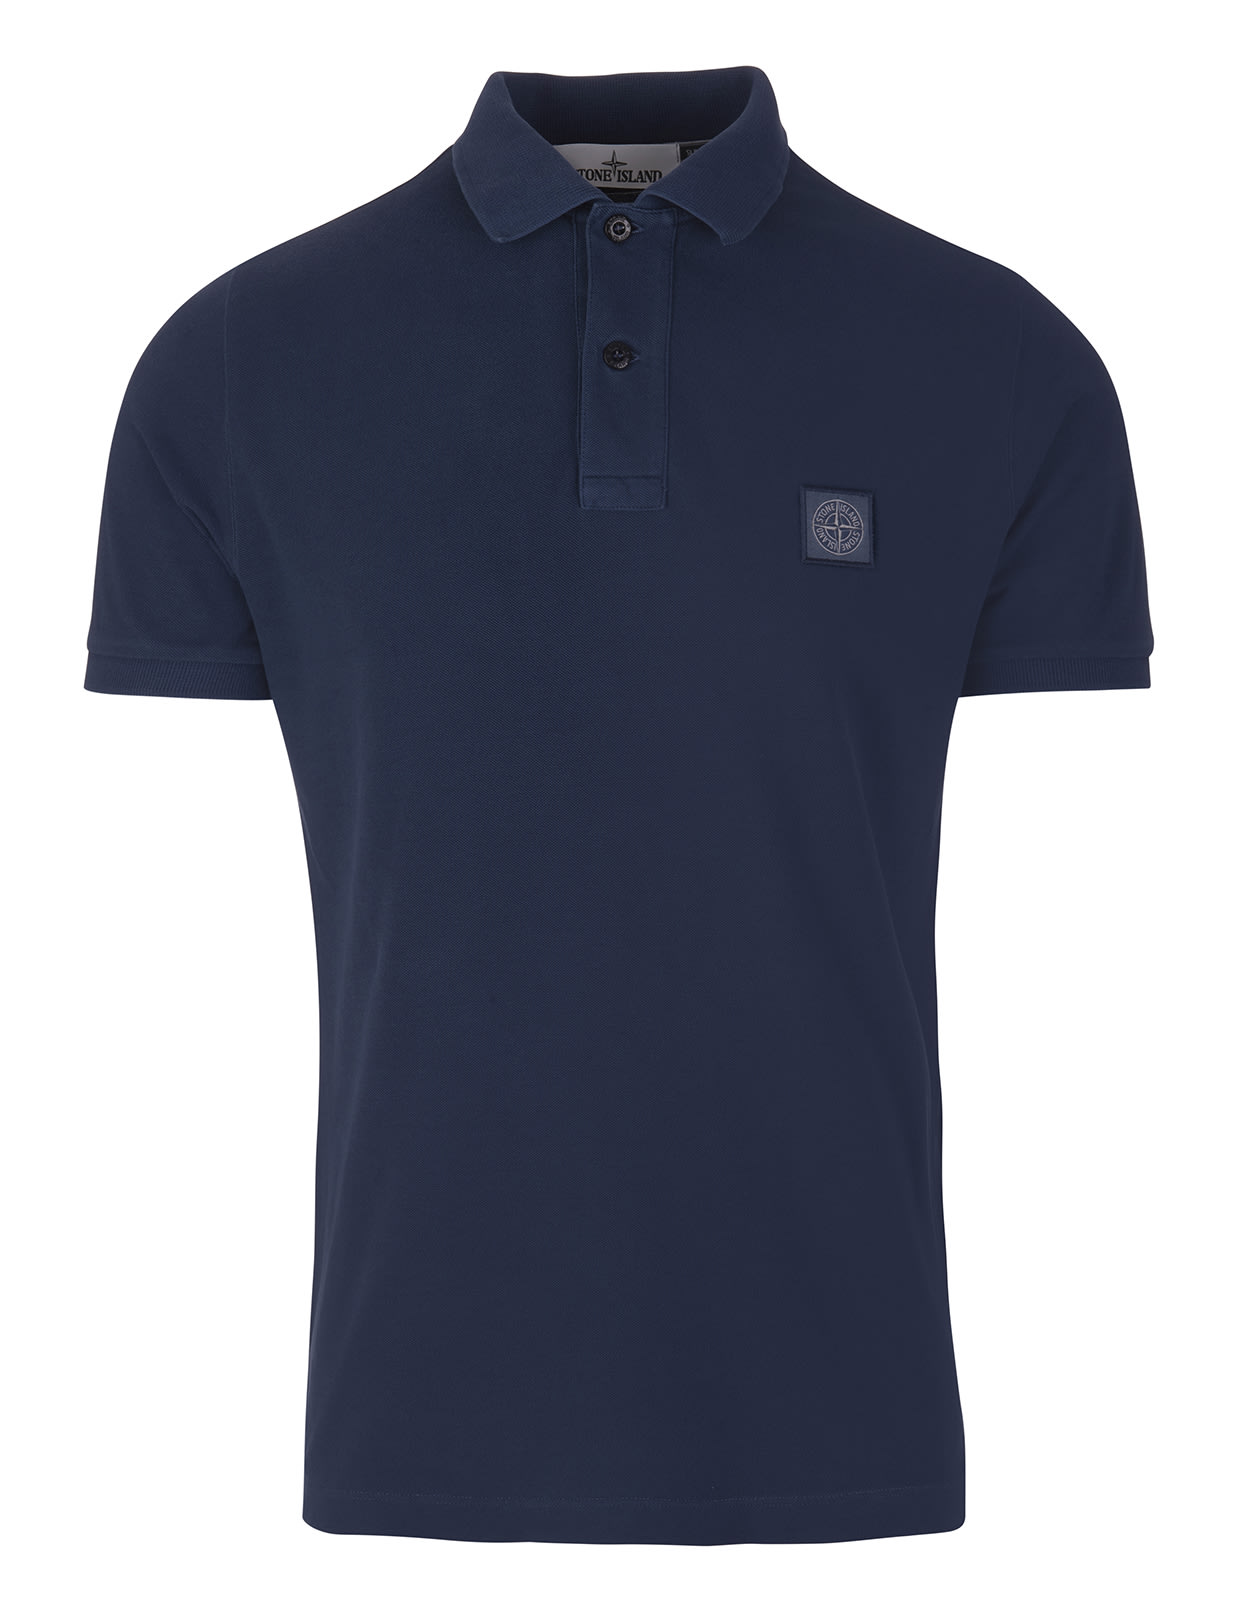 Man Polo Shirt In Night Blue Cotton Piquet With Stone Island Compass Rose Patch